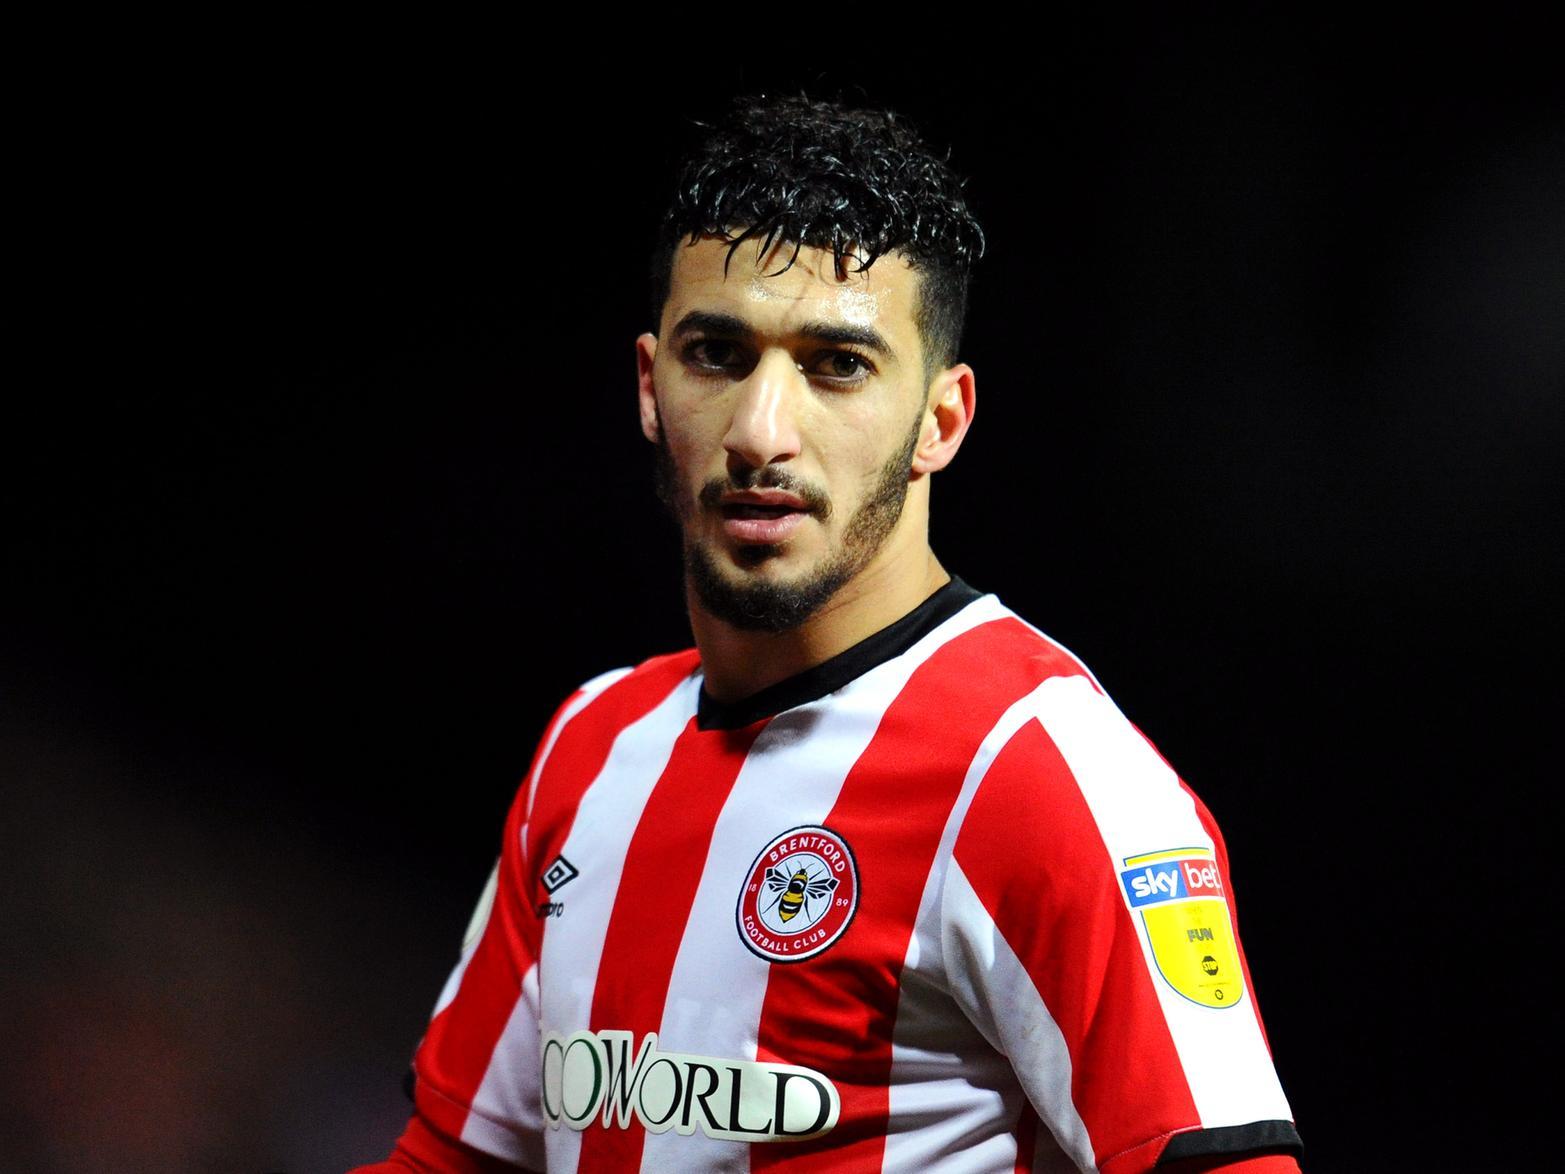 Newcastle United and Leicester City have been tipped to go toe-to-toe for Brentford forwardSaid Benrahma, who has scored eight goals and made five assists so far this season. (Various)